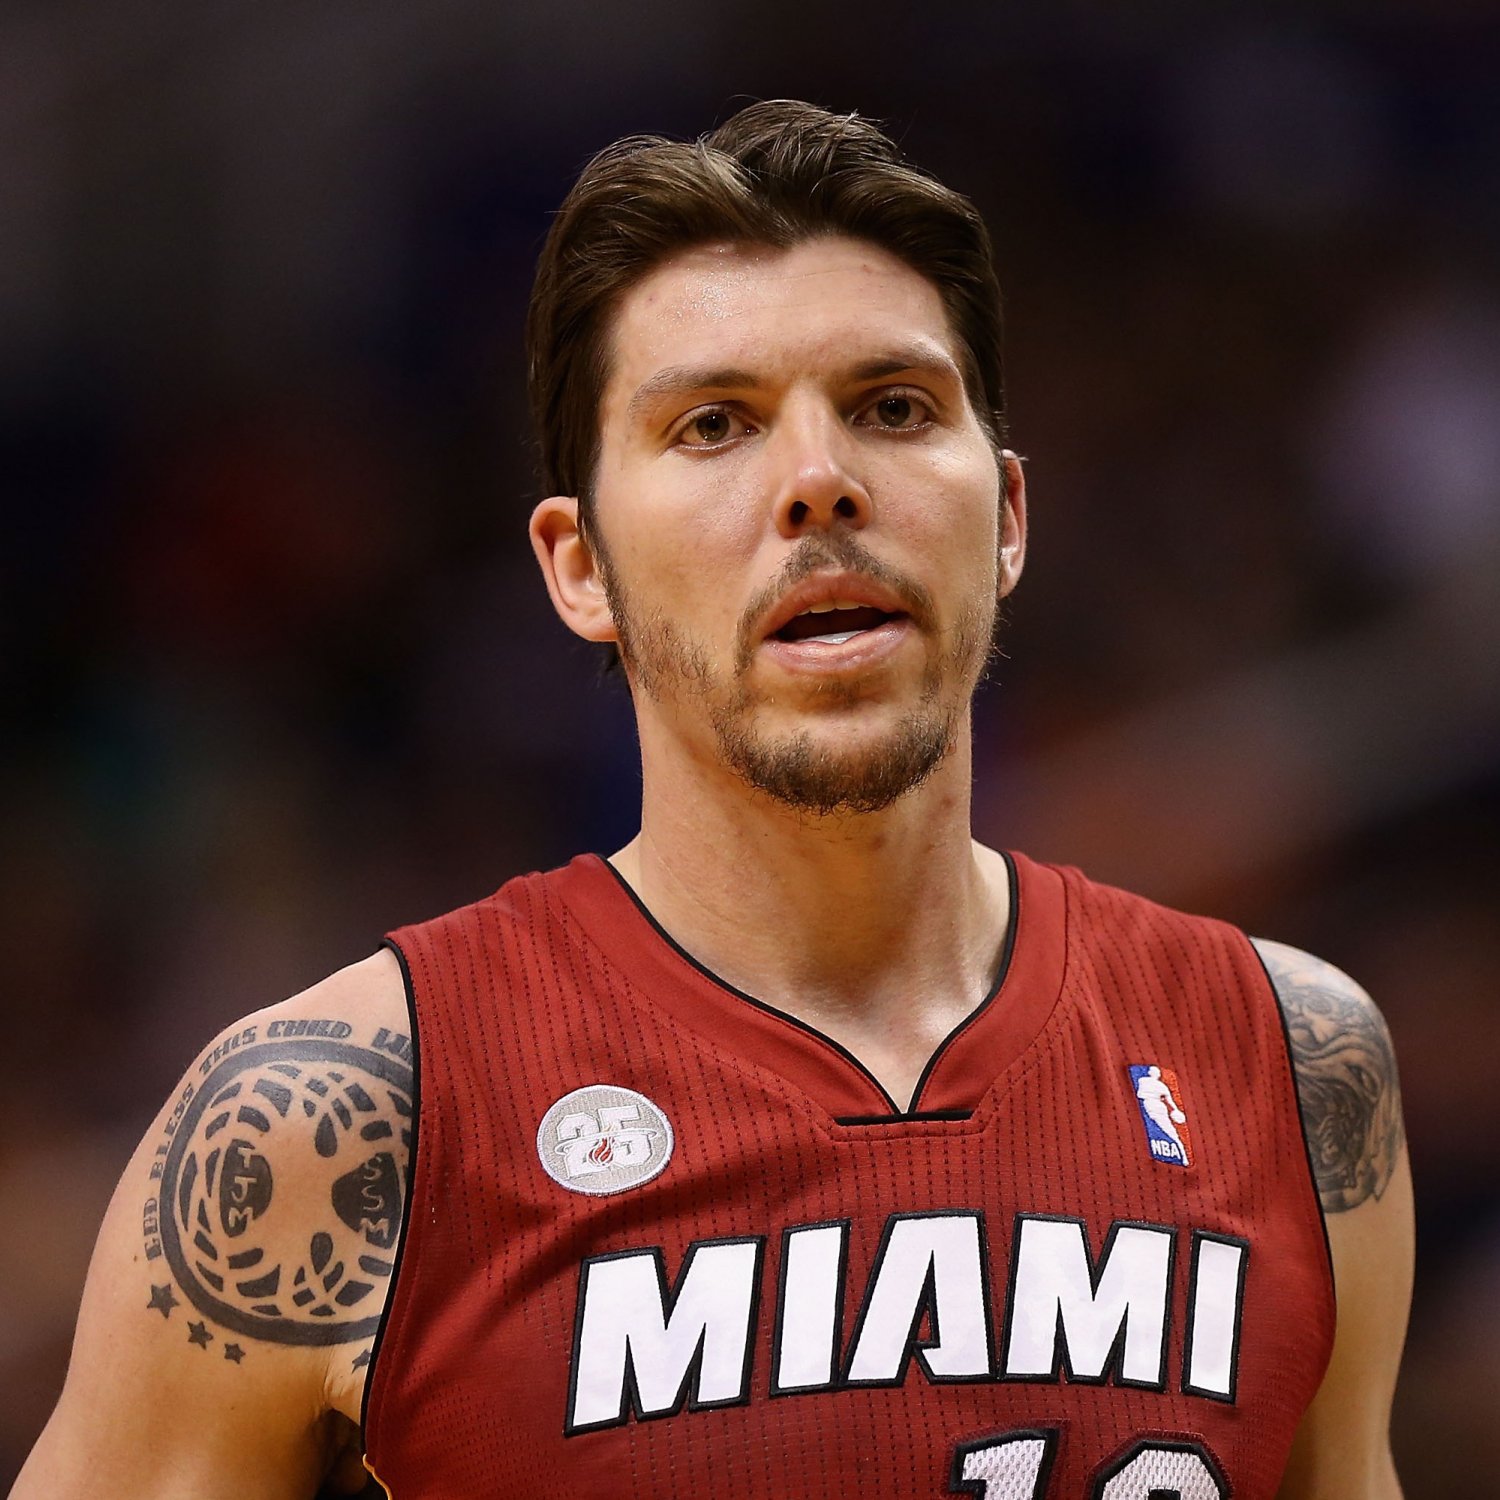 Miami Heat Mike Miller Proving His Worth in Absence of Stars